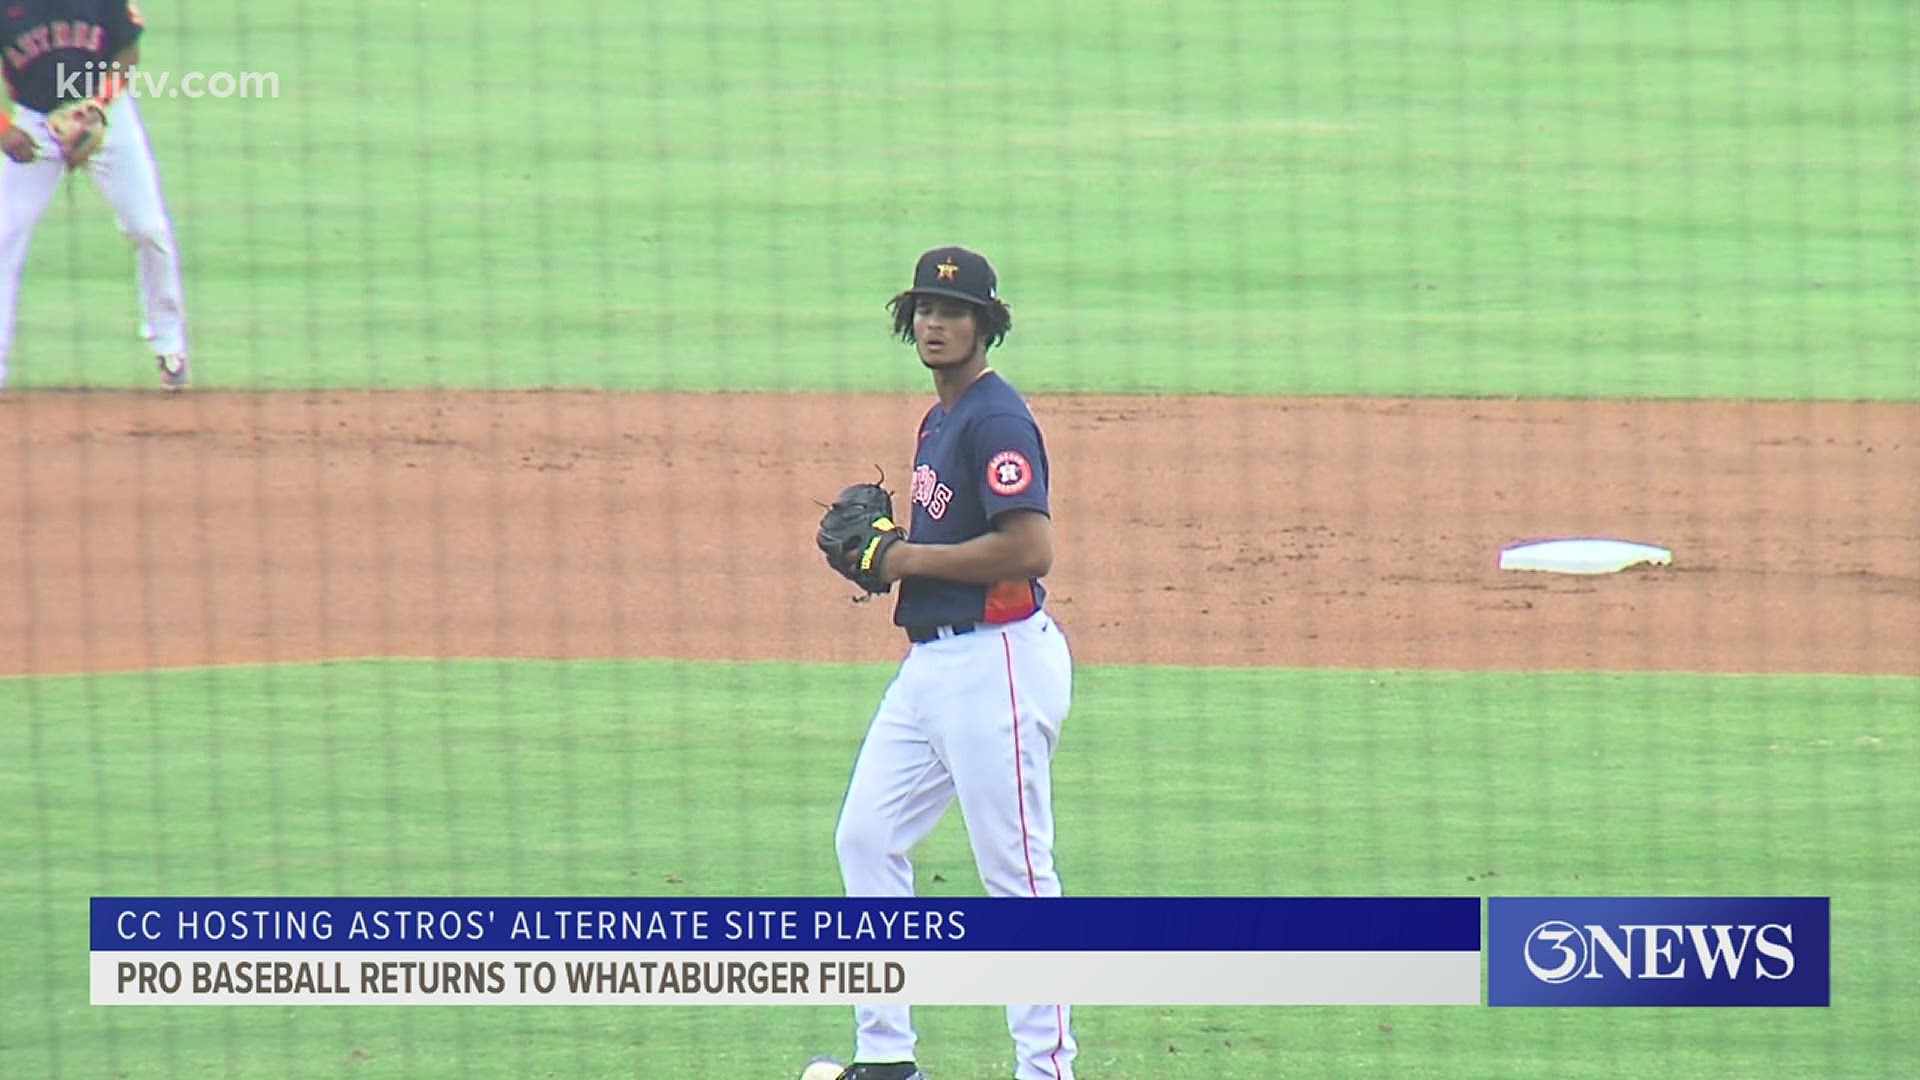 The Houston alternates (essentially the Triple-A roster) got a 9-3 win over the Rangers' alternates in the first pro game at Whataburger Field in 588 days.